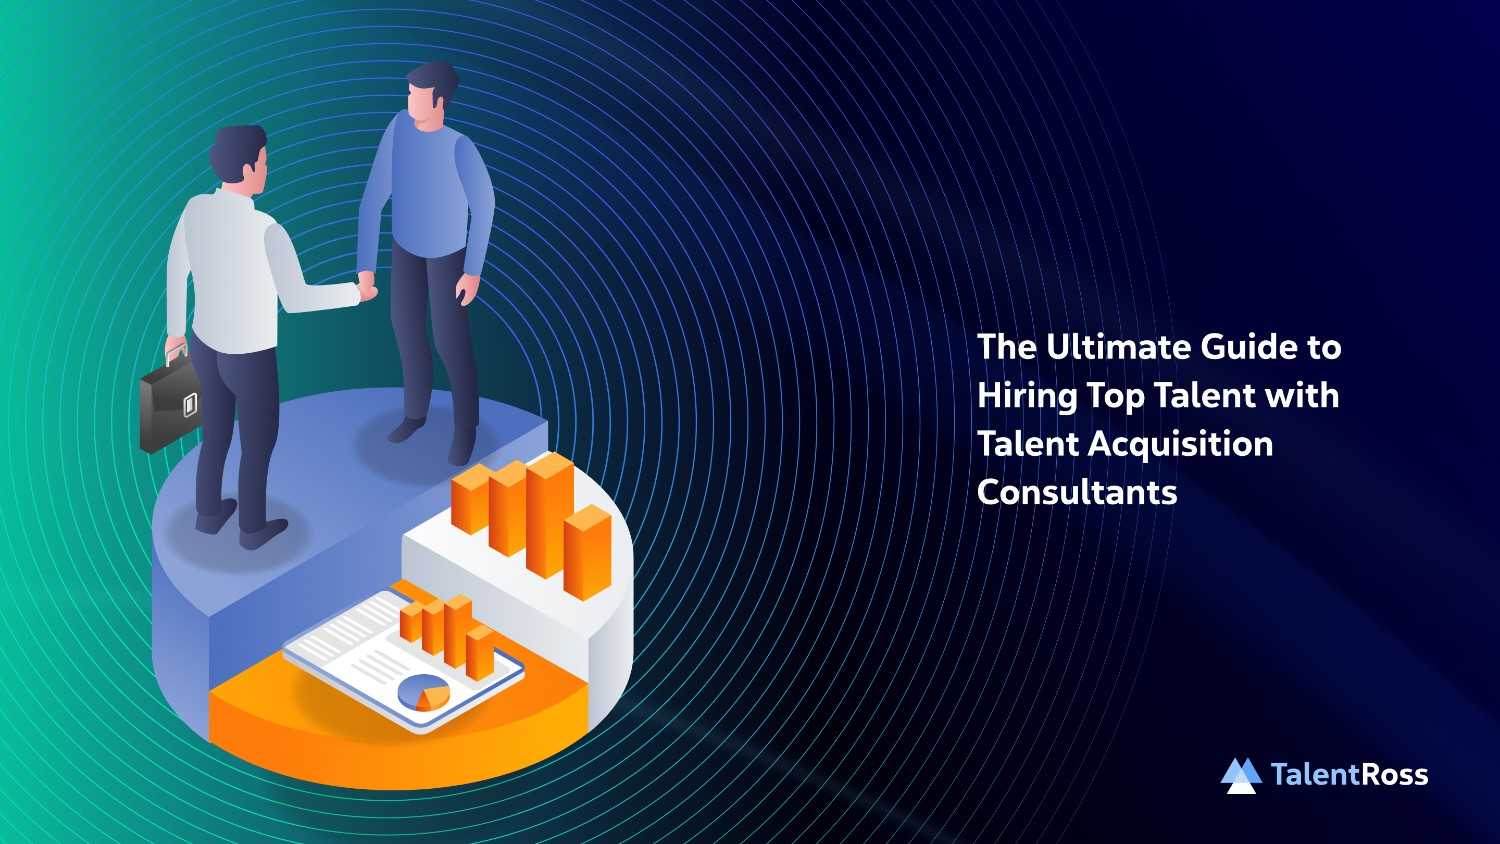 The Ultimate Guide to Hiring Top Talent with Talent Acquisition Consultants